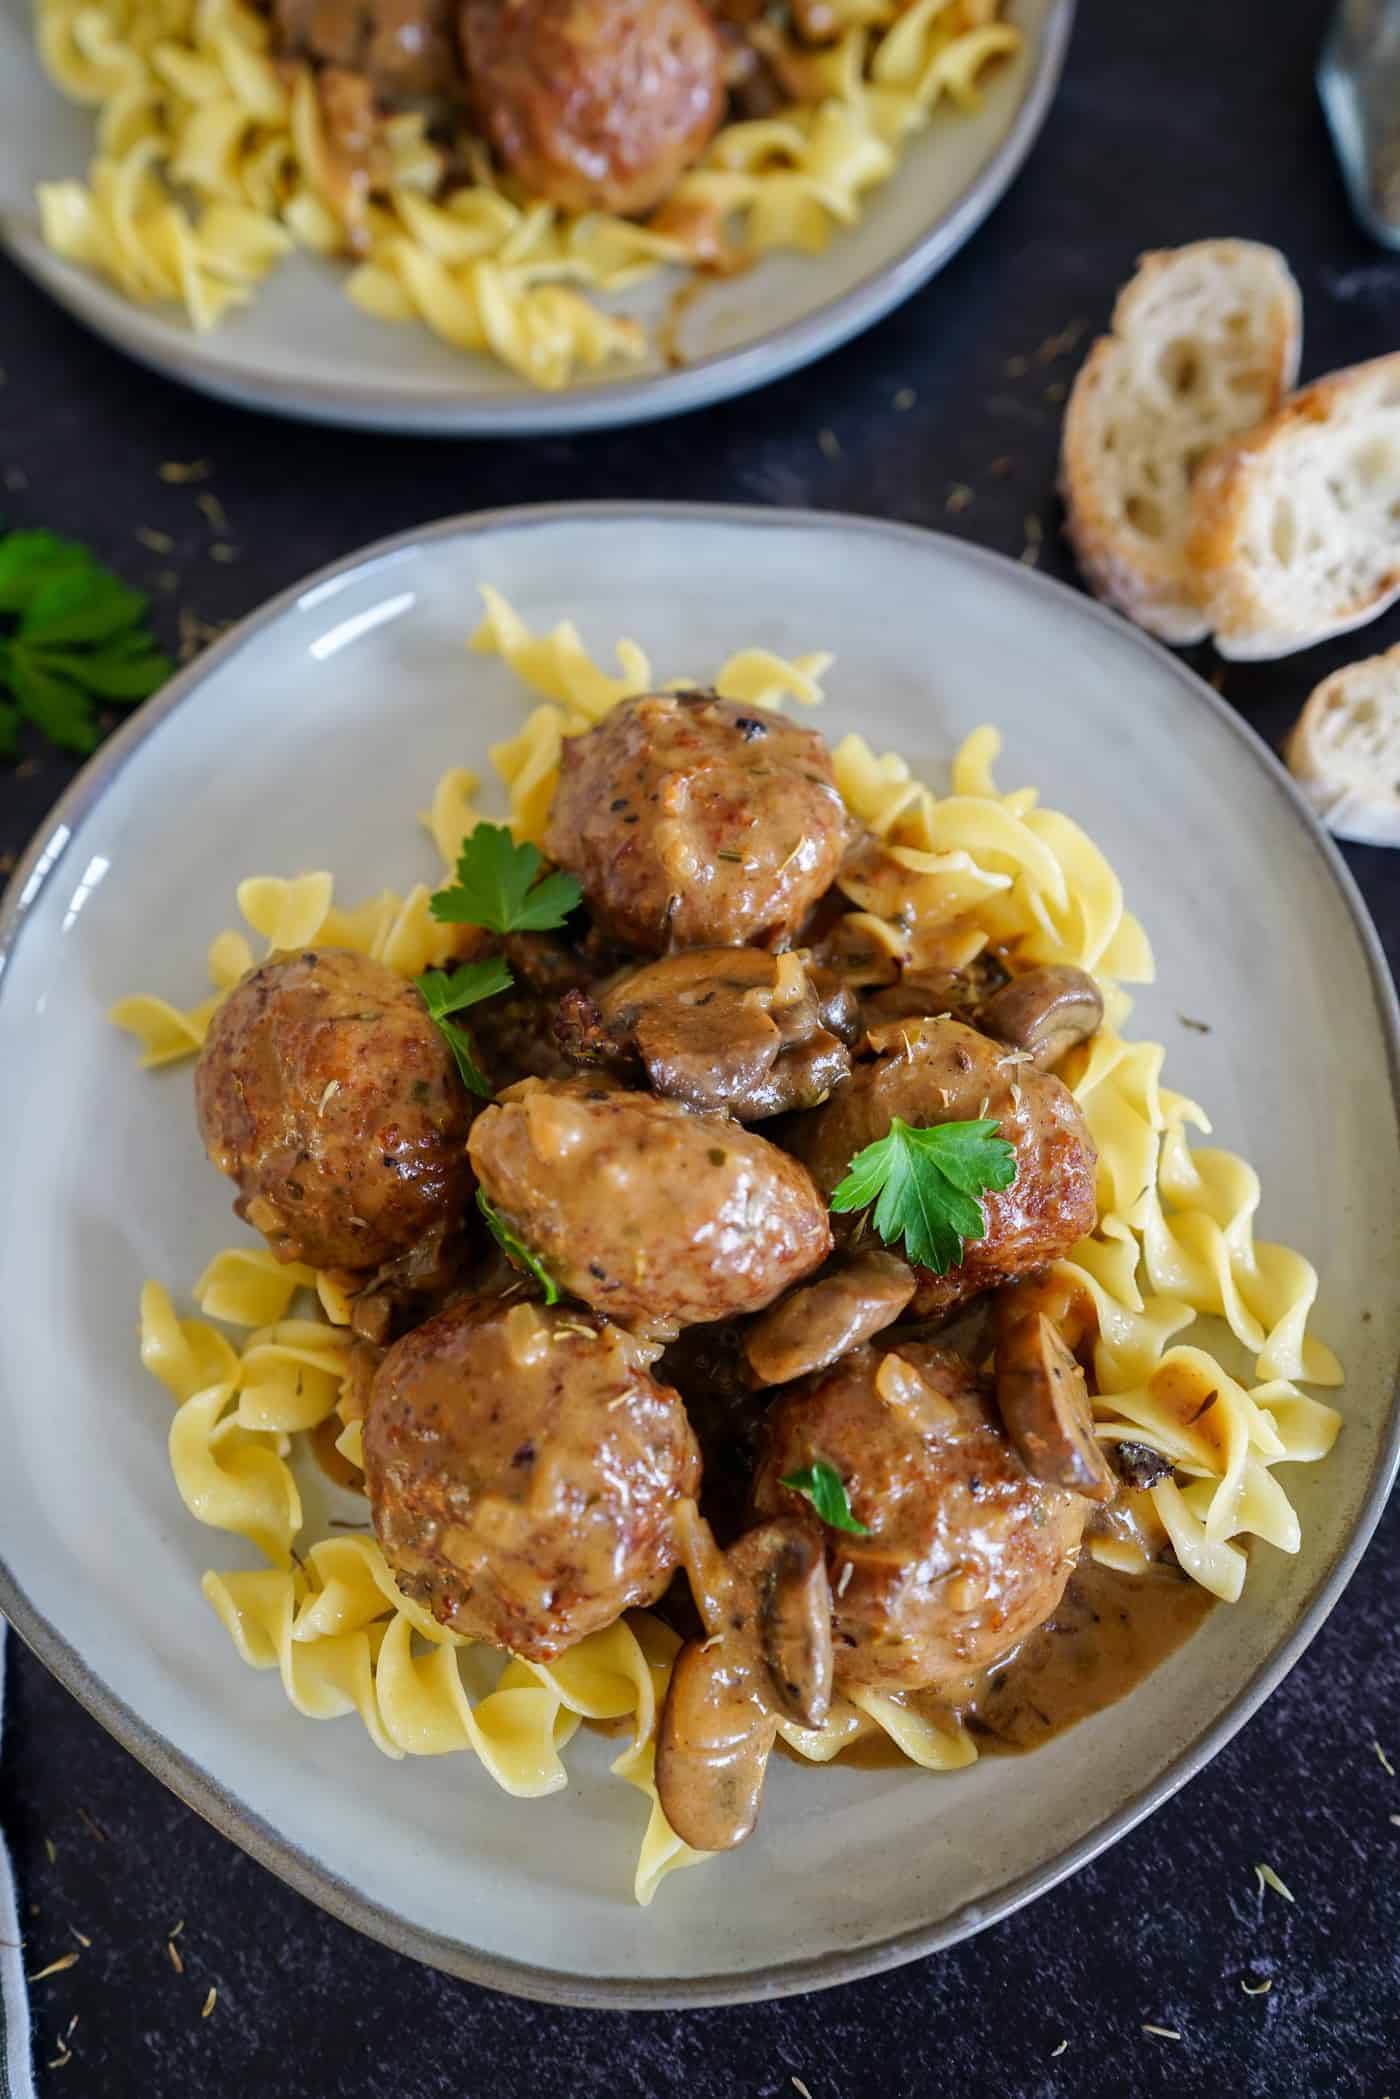 A Lily Love Affair shares a recipe for meatball stroganoff made with Italian meatballs, mushrooms over egg noodles